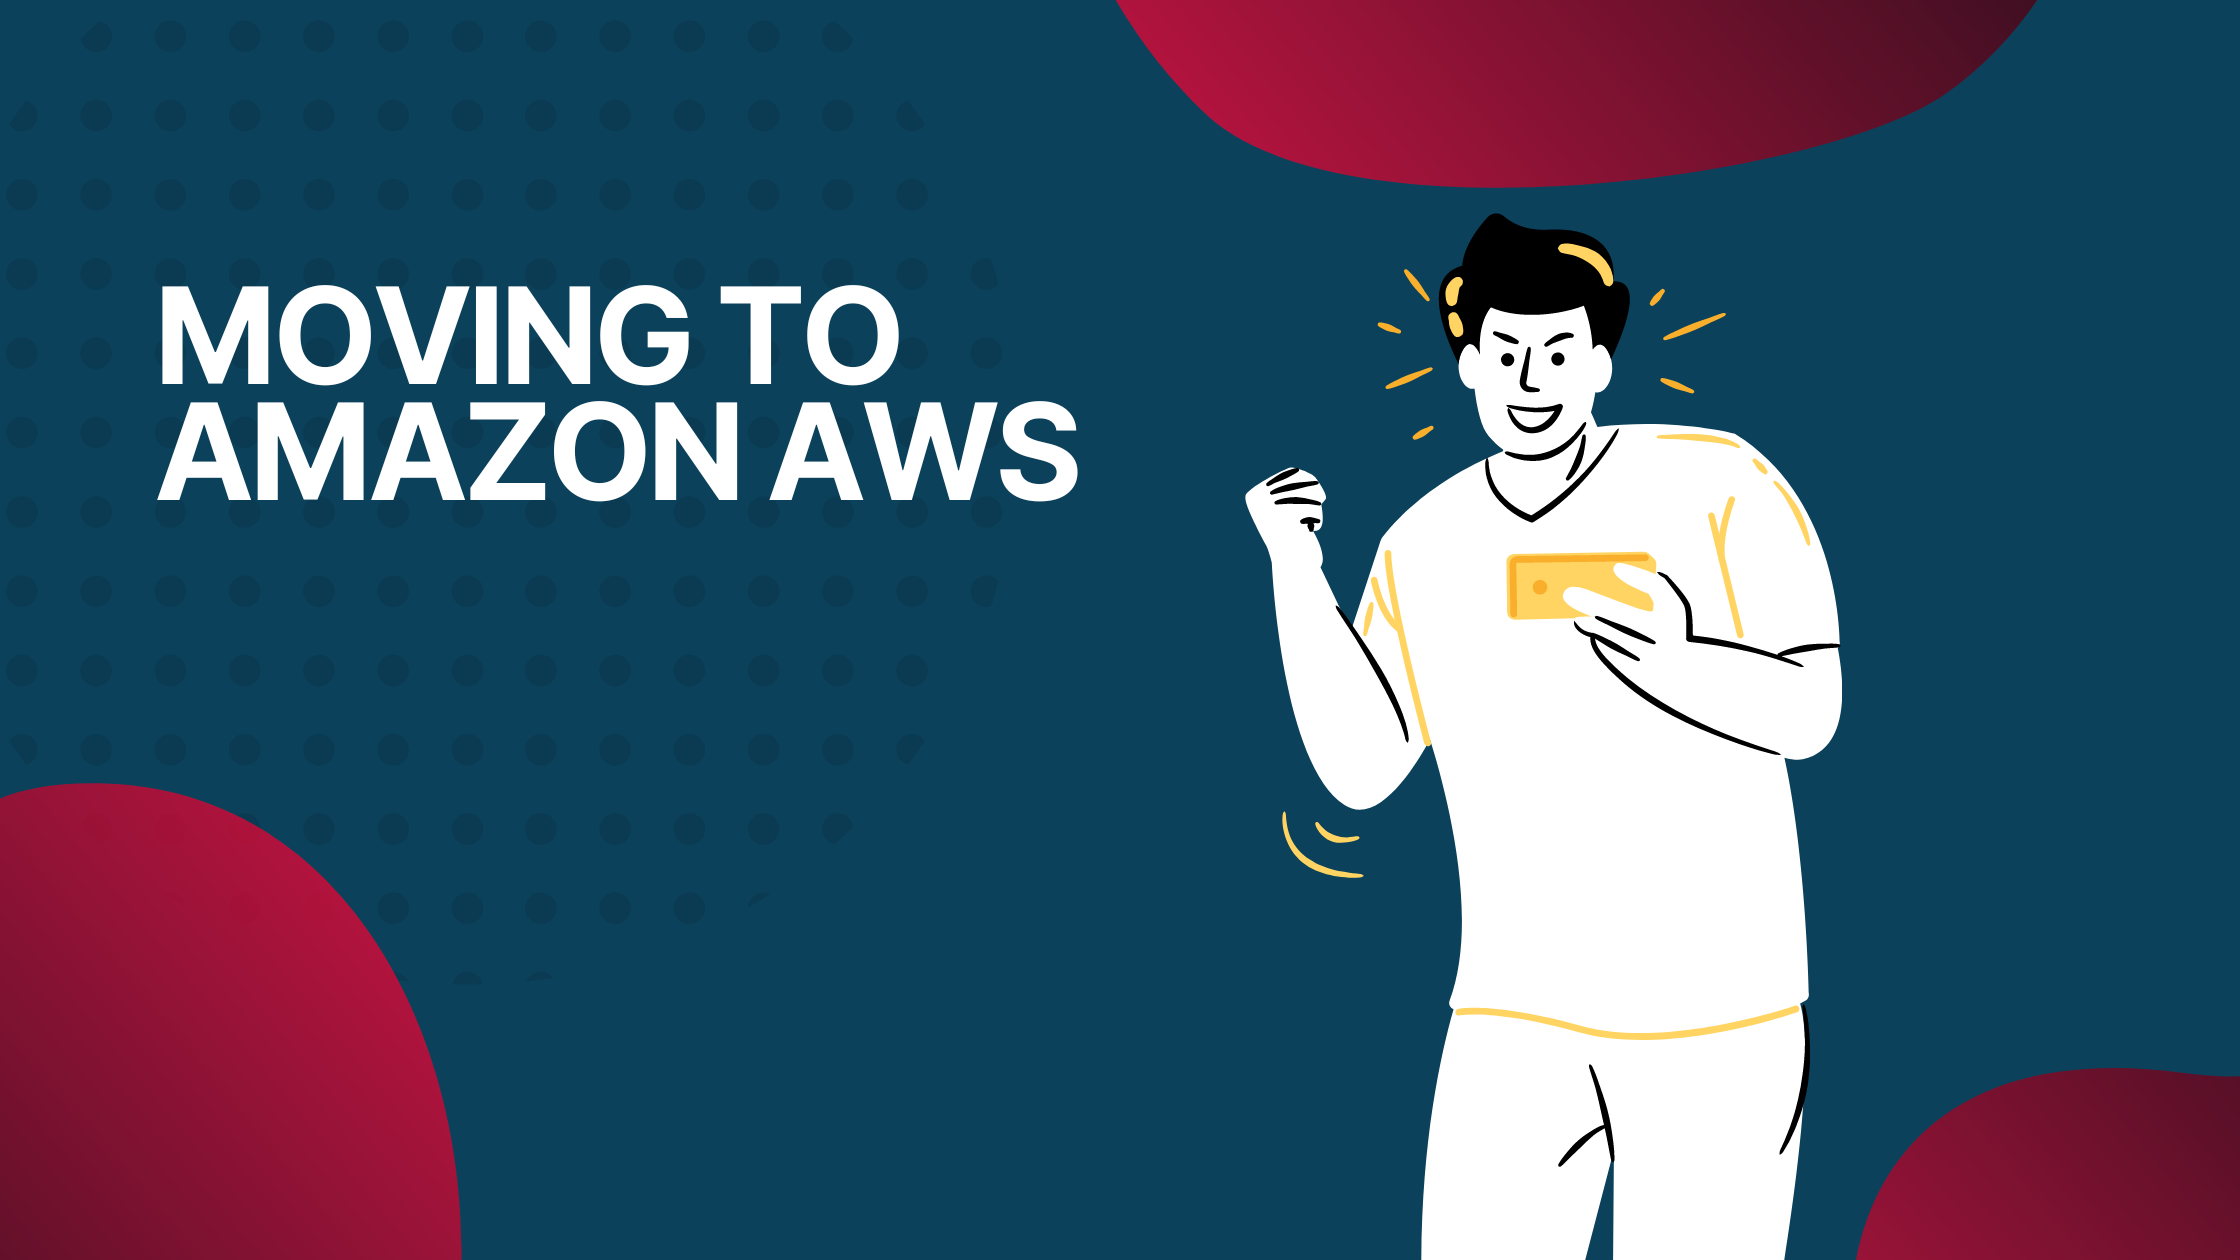 The image shows someone transferring their data to Amazon Web Services (AWS) cloud storage.